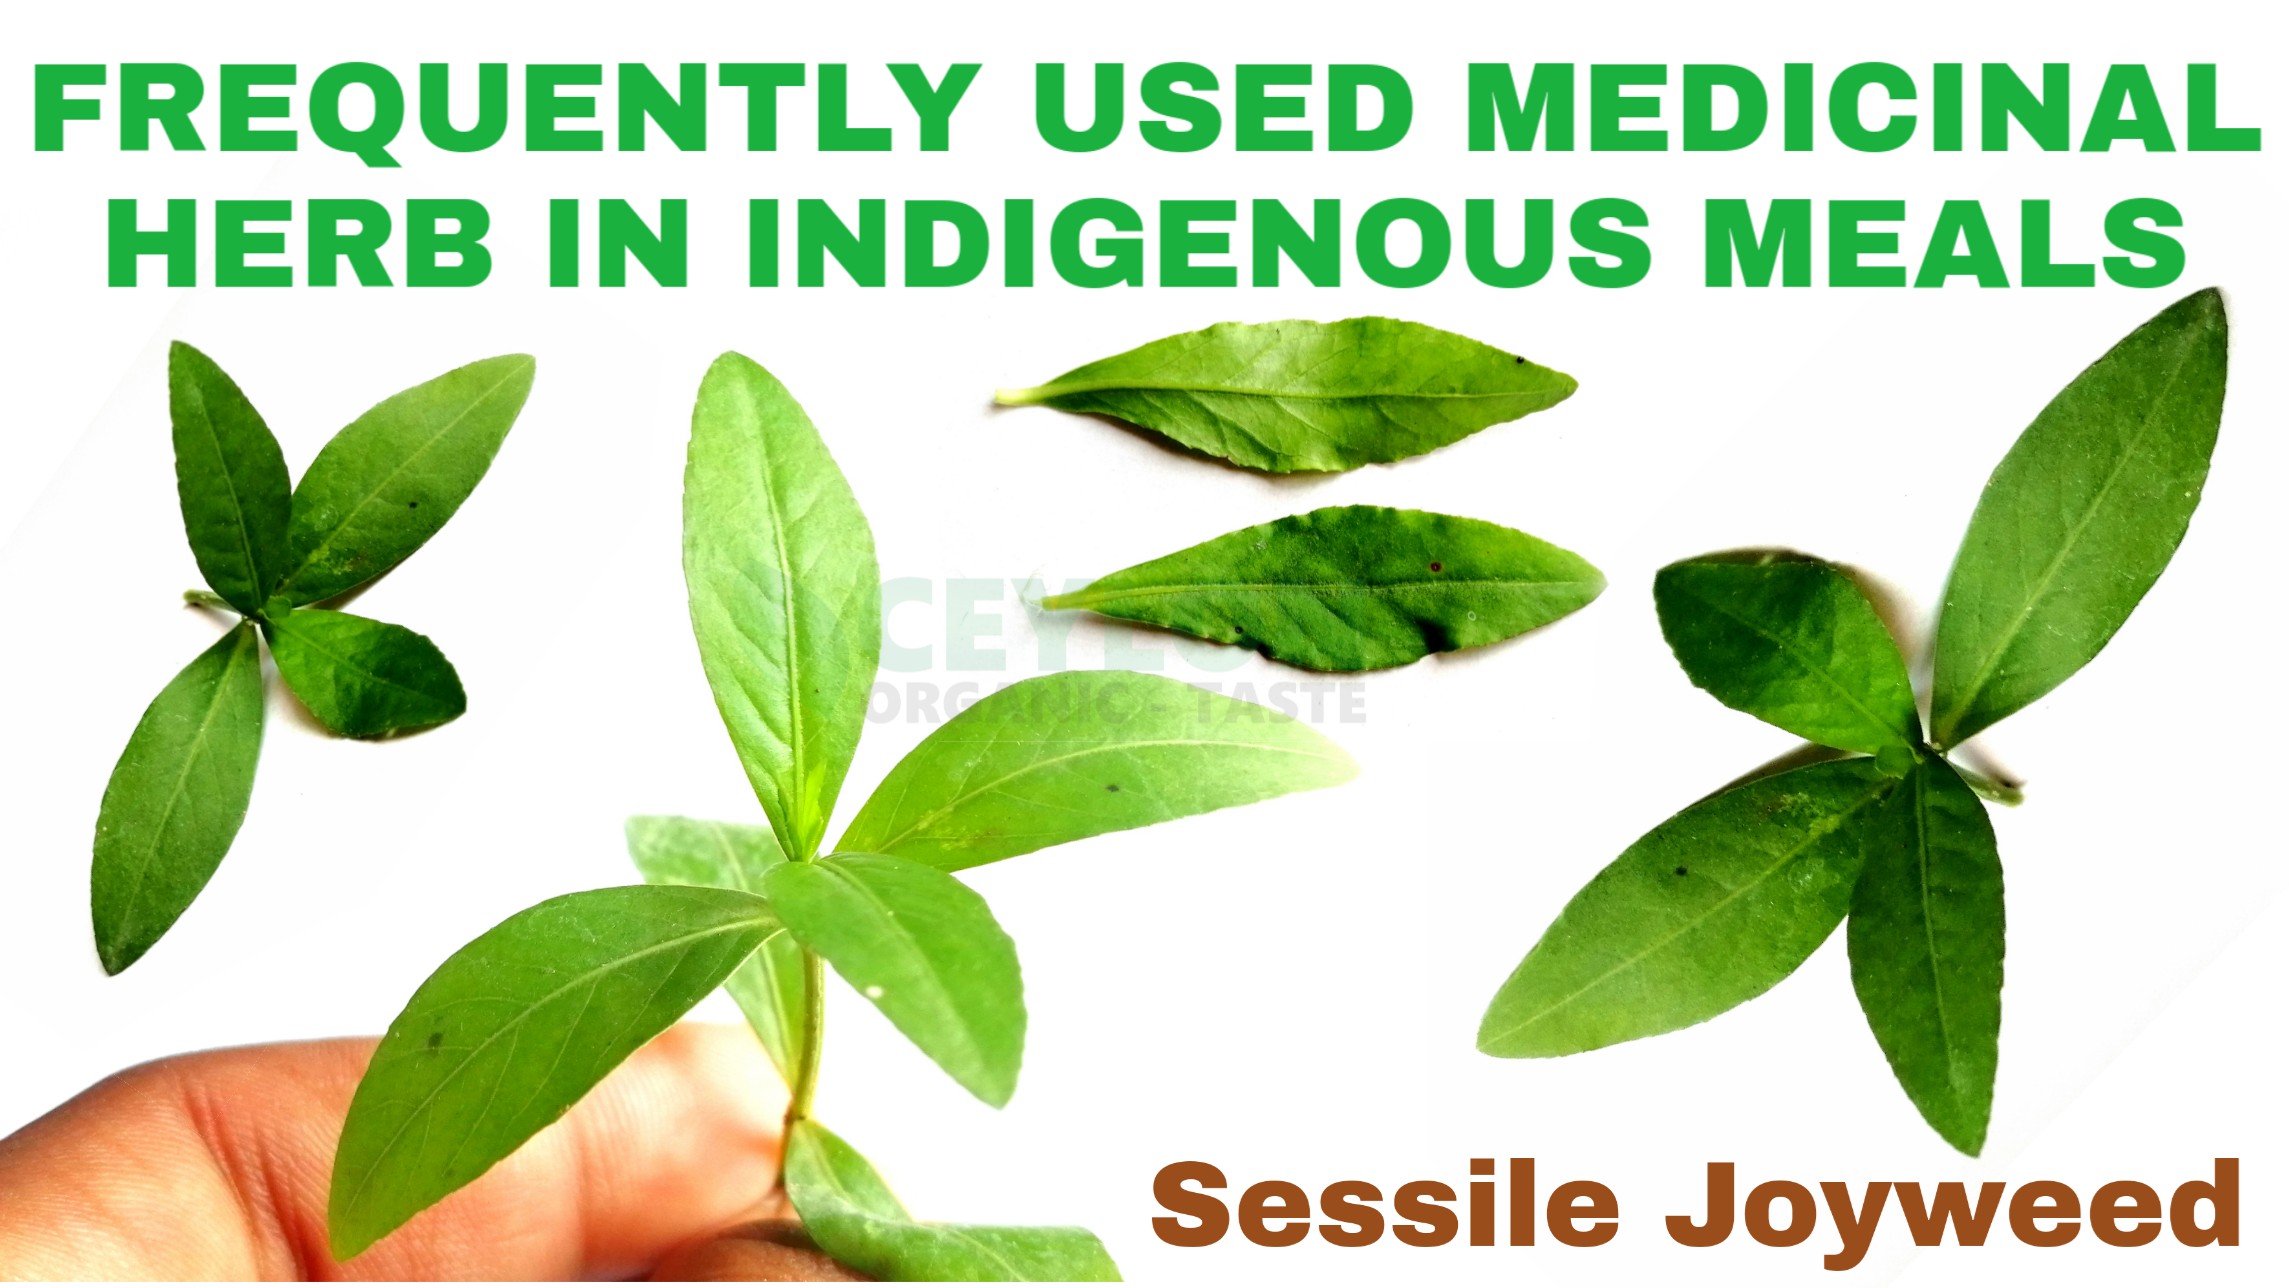 Sessile Joyweed – Frequently used medicinal herb in indigenous meals